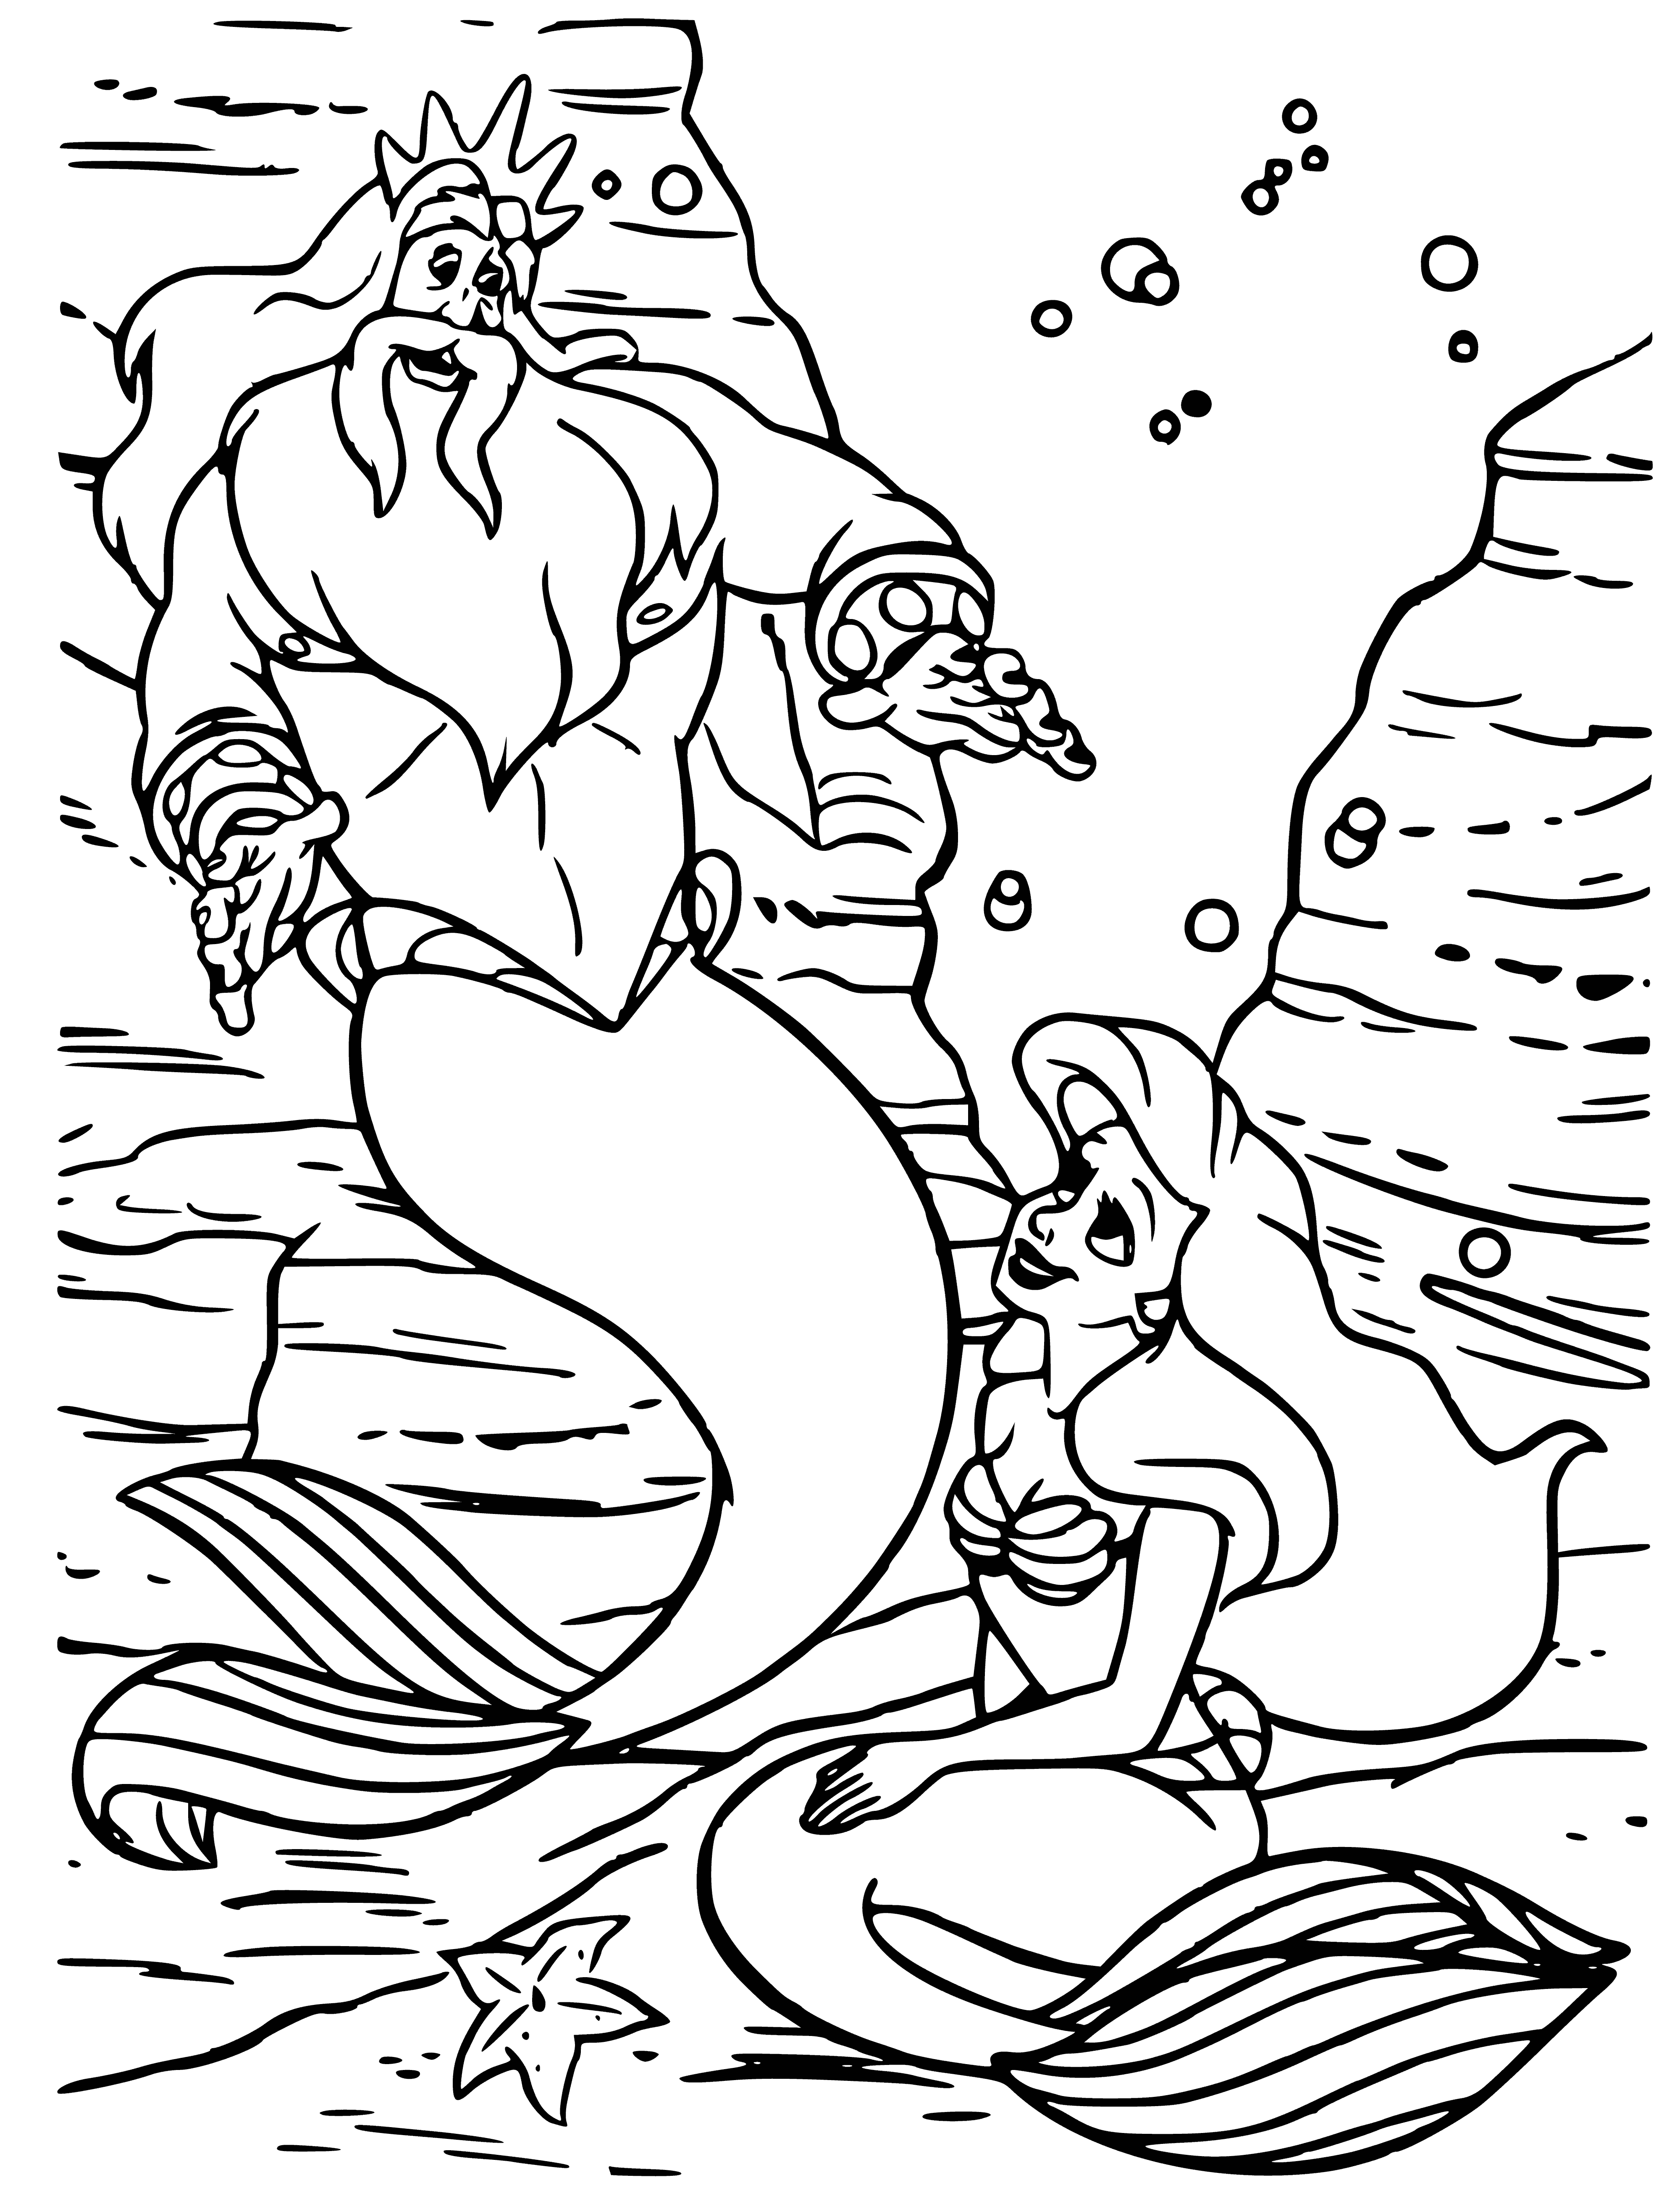 coloring page: Neptune and Ariel, King and subject, ruler of the sea and the little mermaid admire each other. #mythology